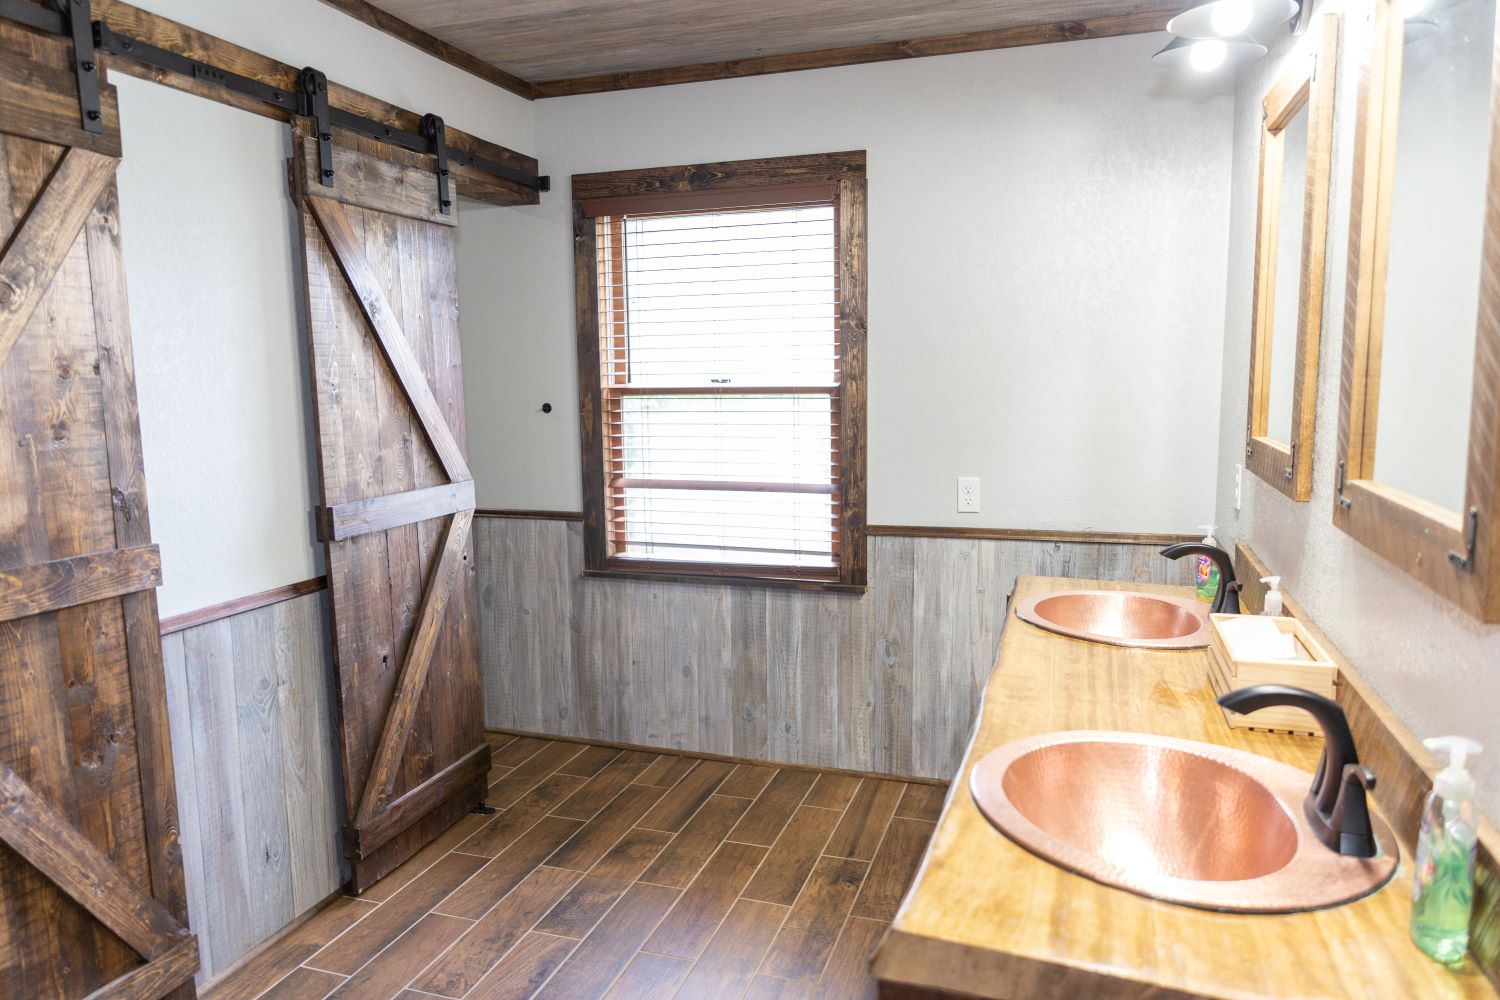 image of bathroom in bunkhouse cabin